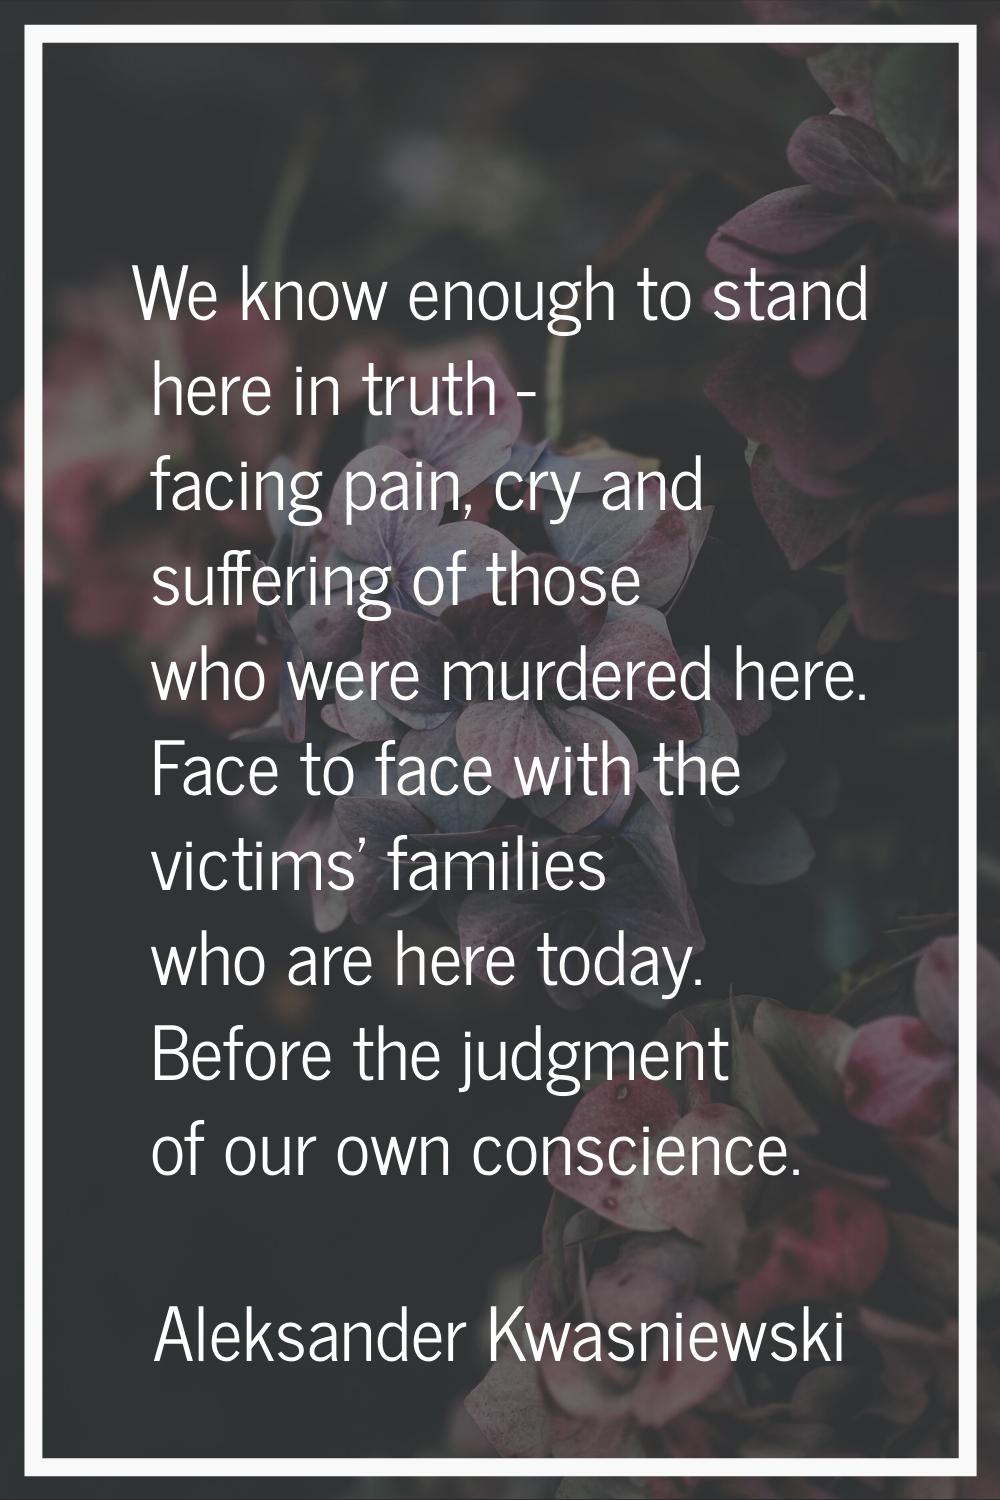 We know enough to stand here in truth - facing pain, cry and suffering of those who were murdered h